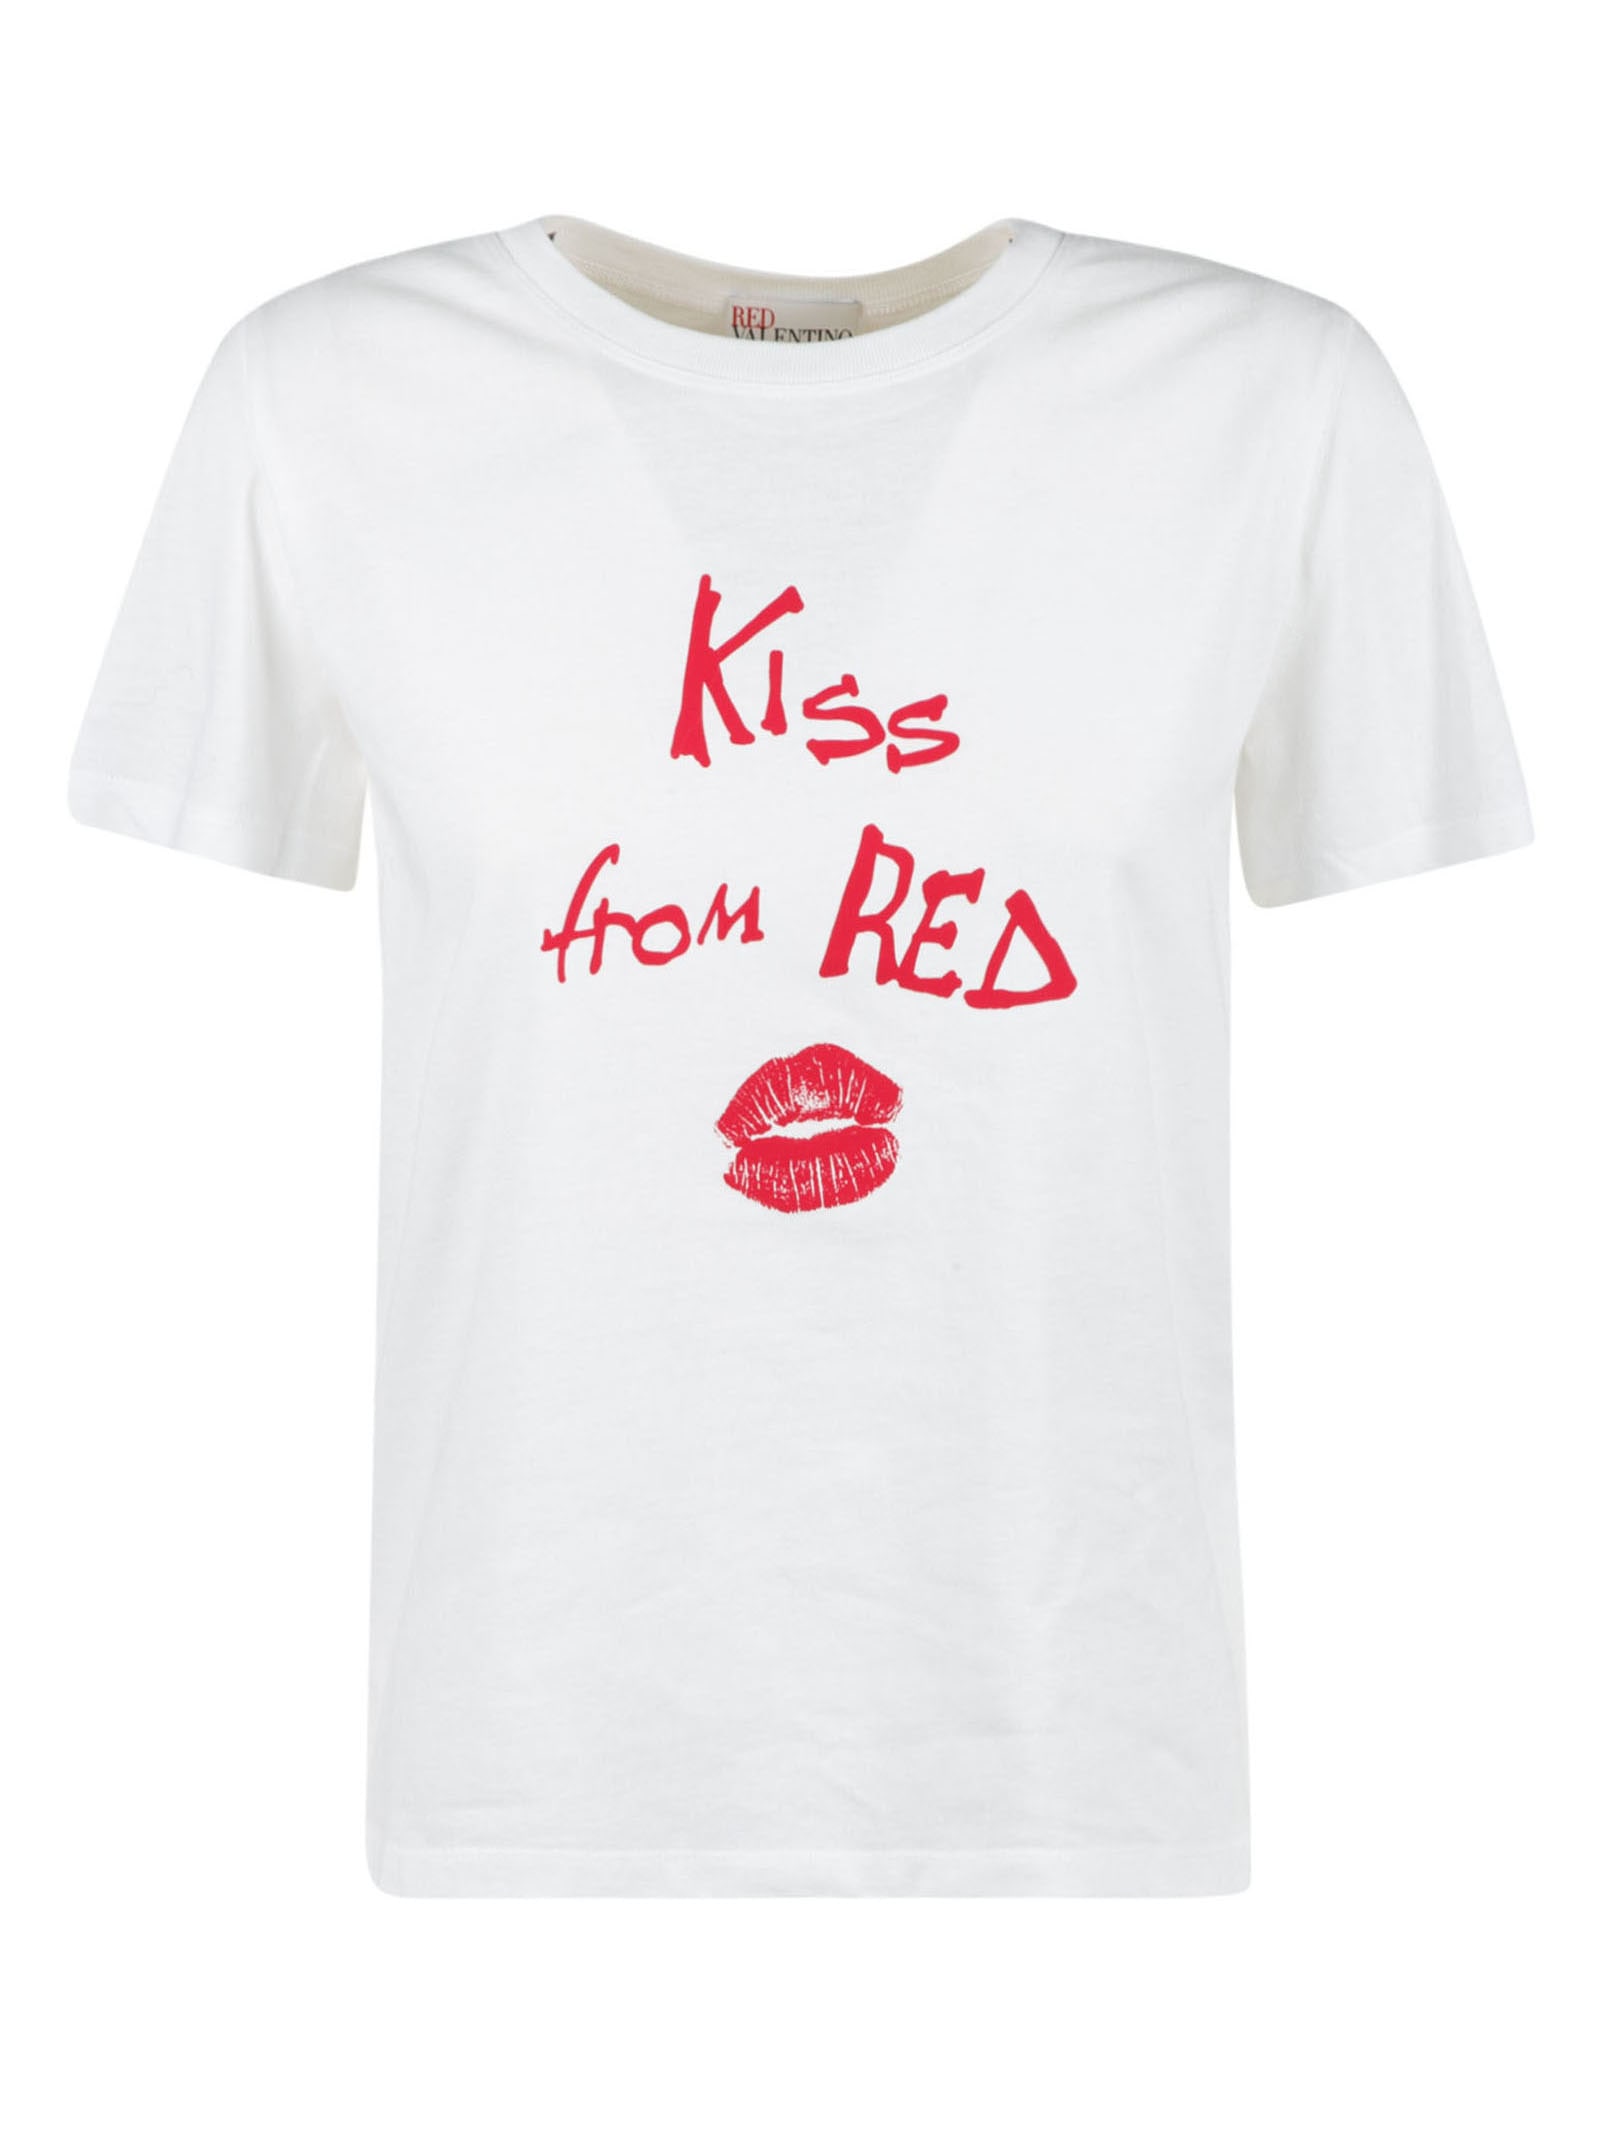 RED Valentino Kiss From Red T-shirt